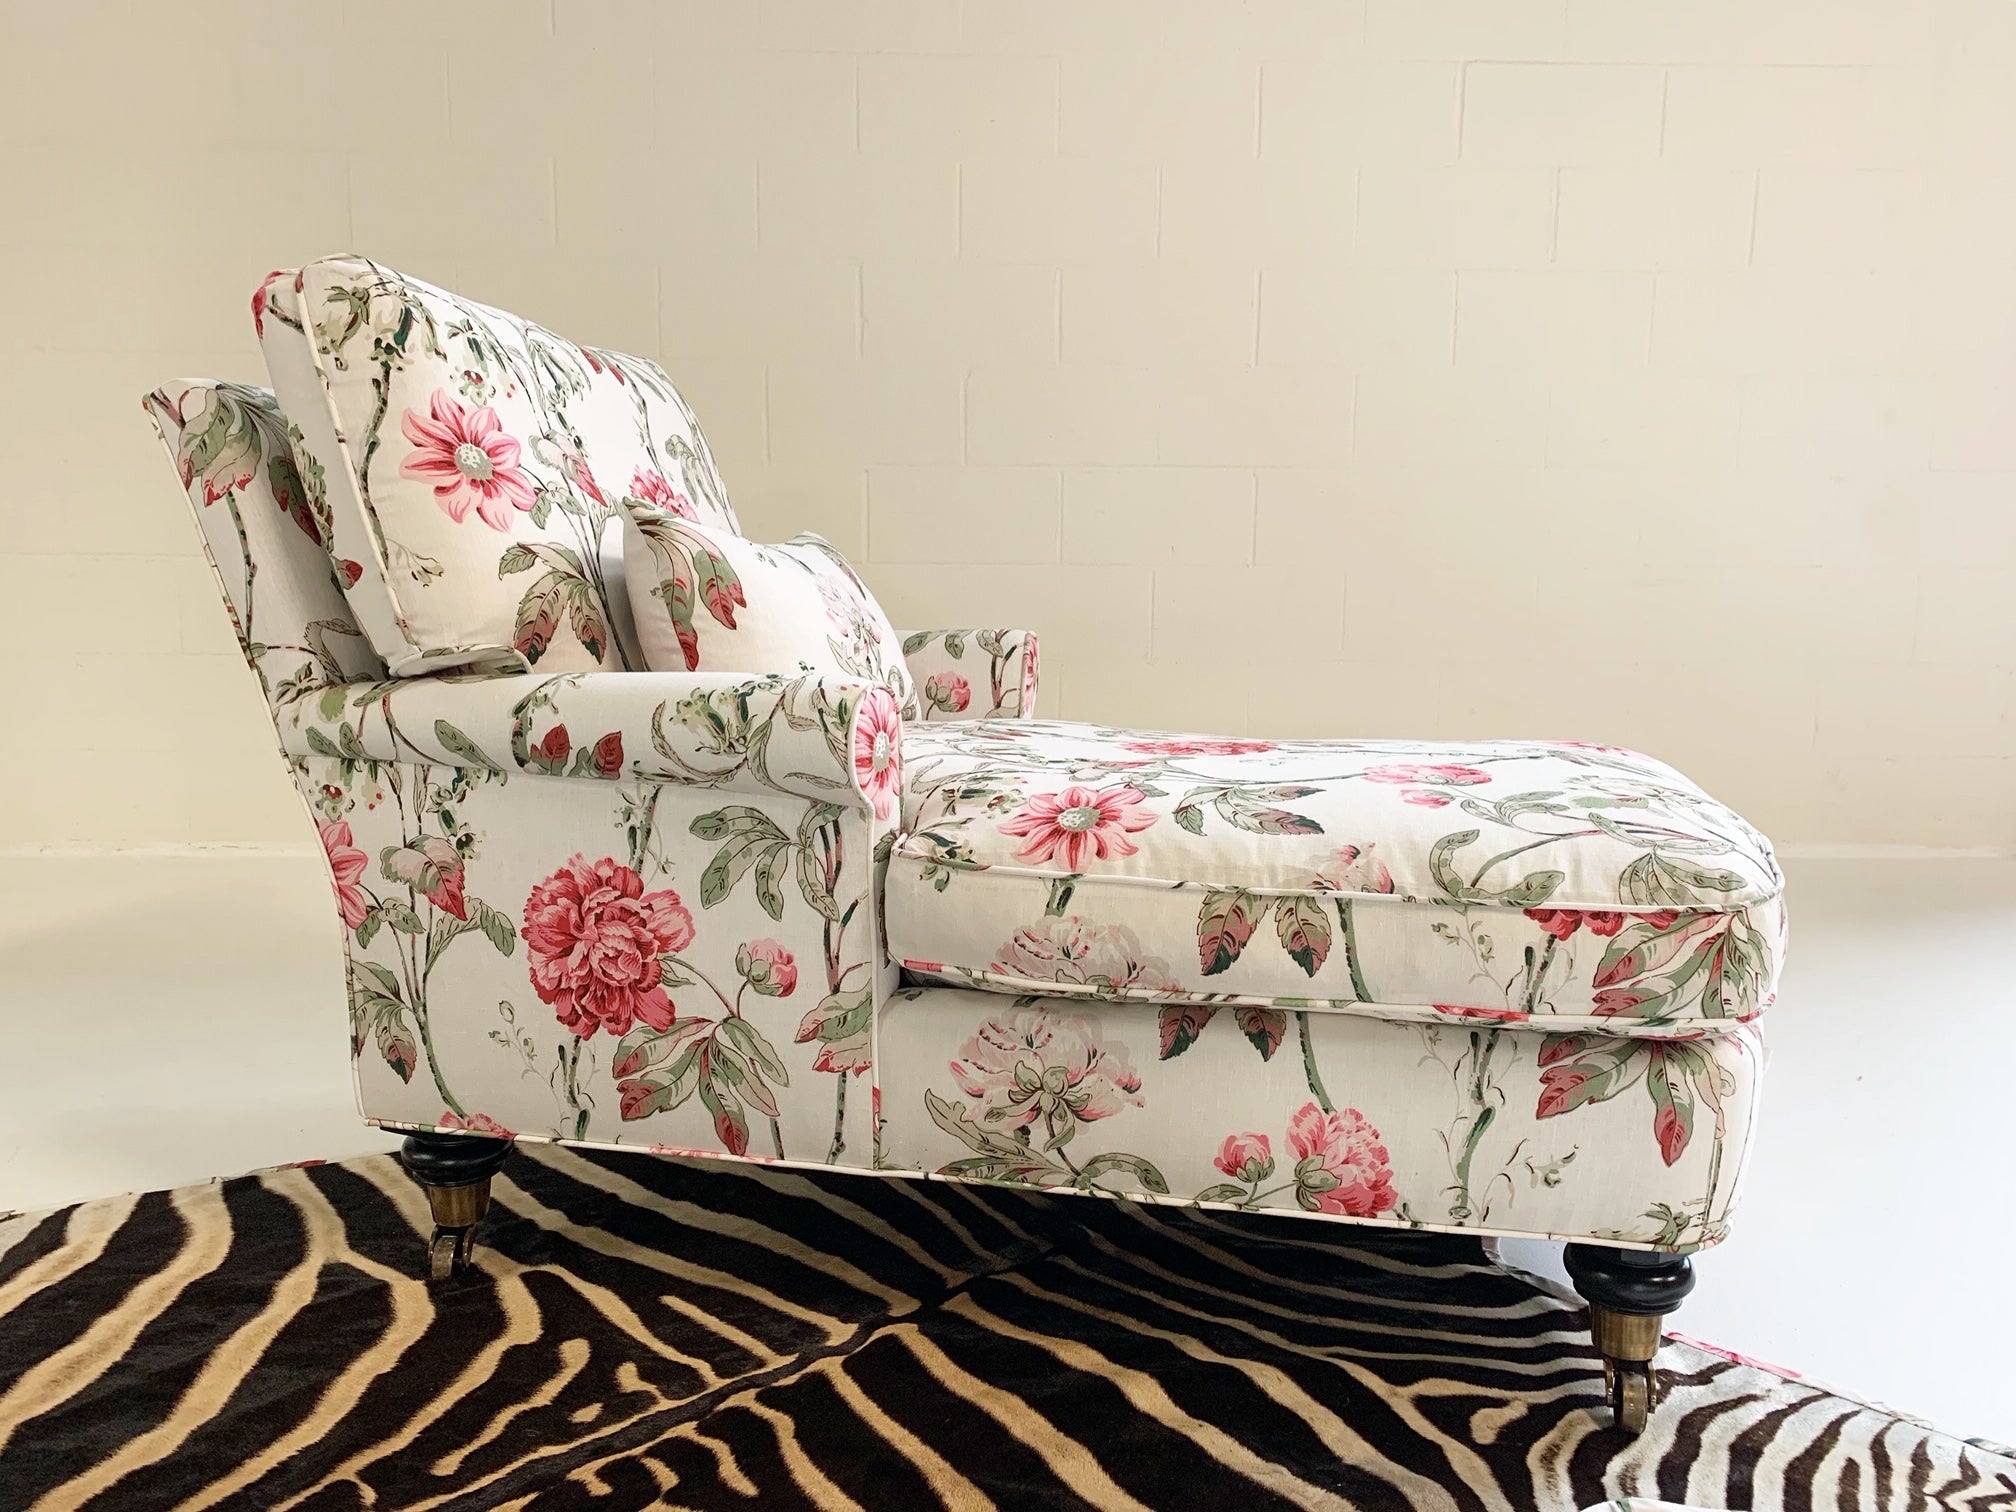 Chaise Lounge in Schumacher Fabric with Zebra Rug - FORSYTH